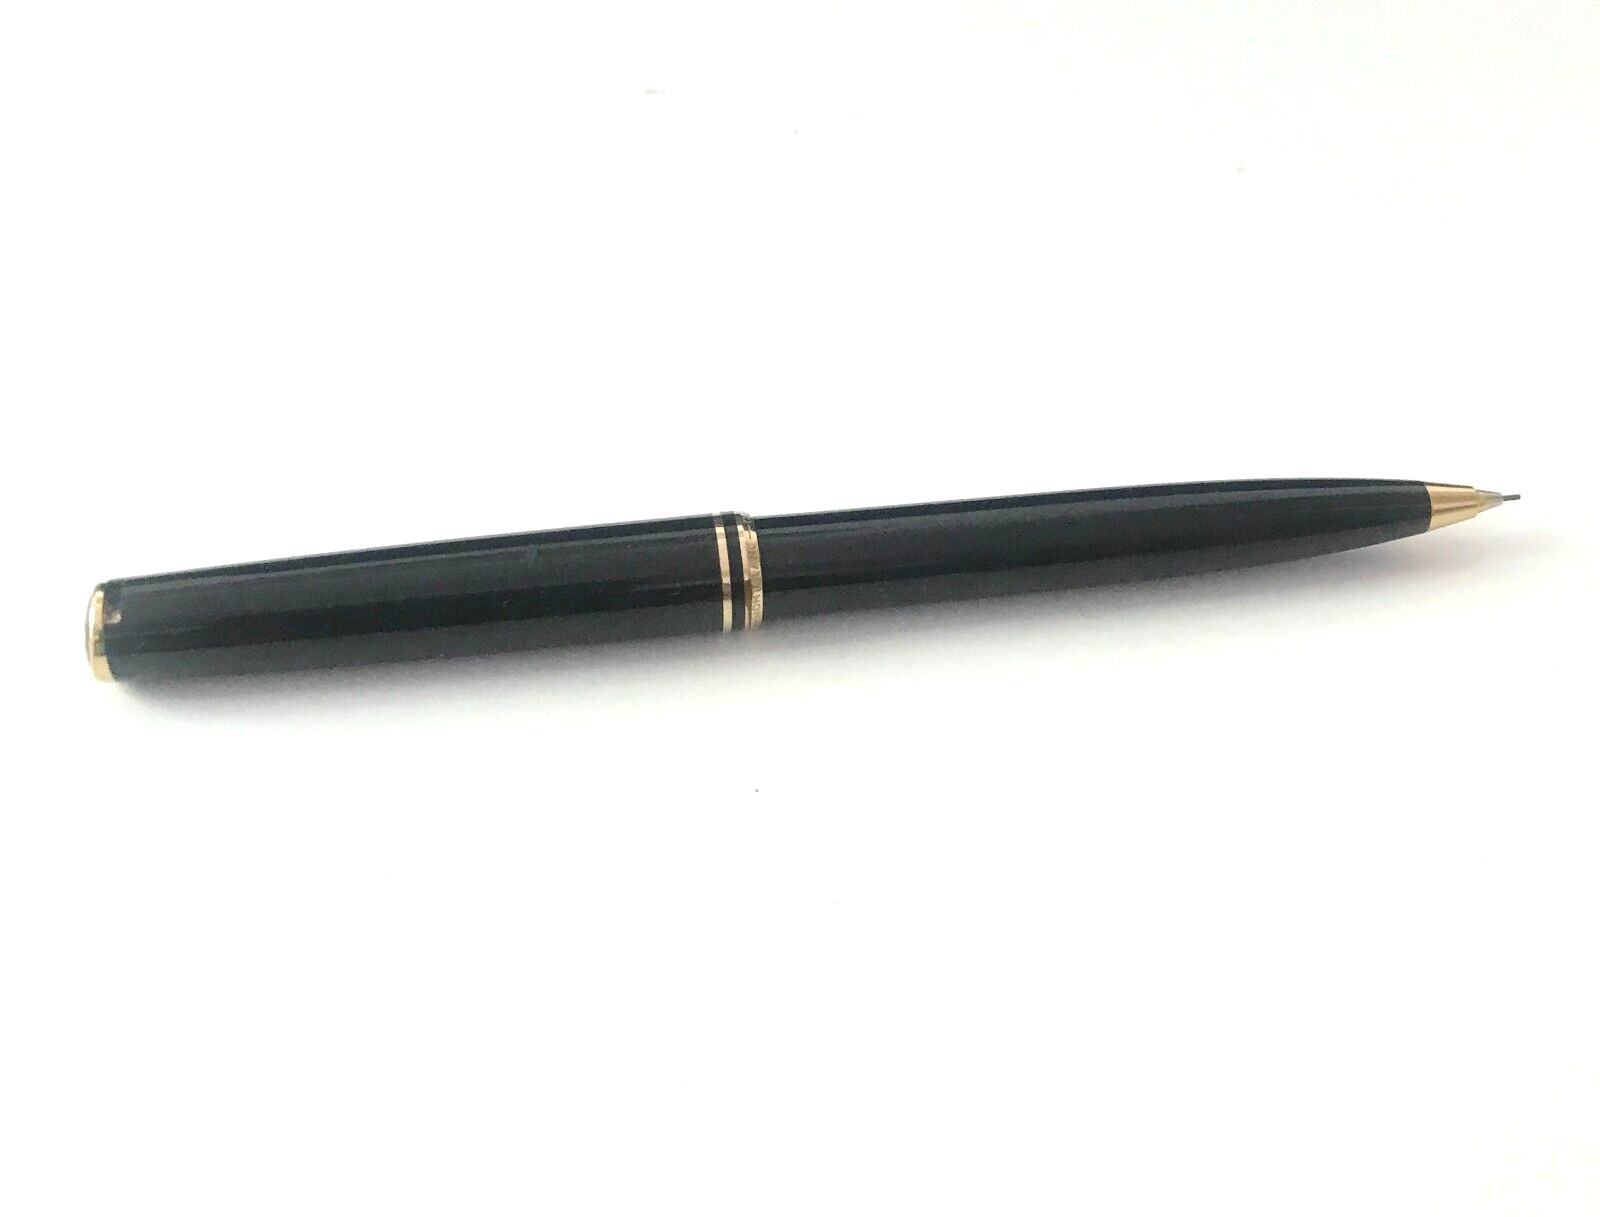 VINTAGE MONTBLANC CLASSIC MECHANICAL PENCIL , 1.18 mm LEAD , GERMANY 60s